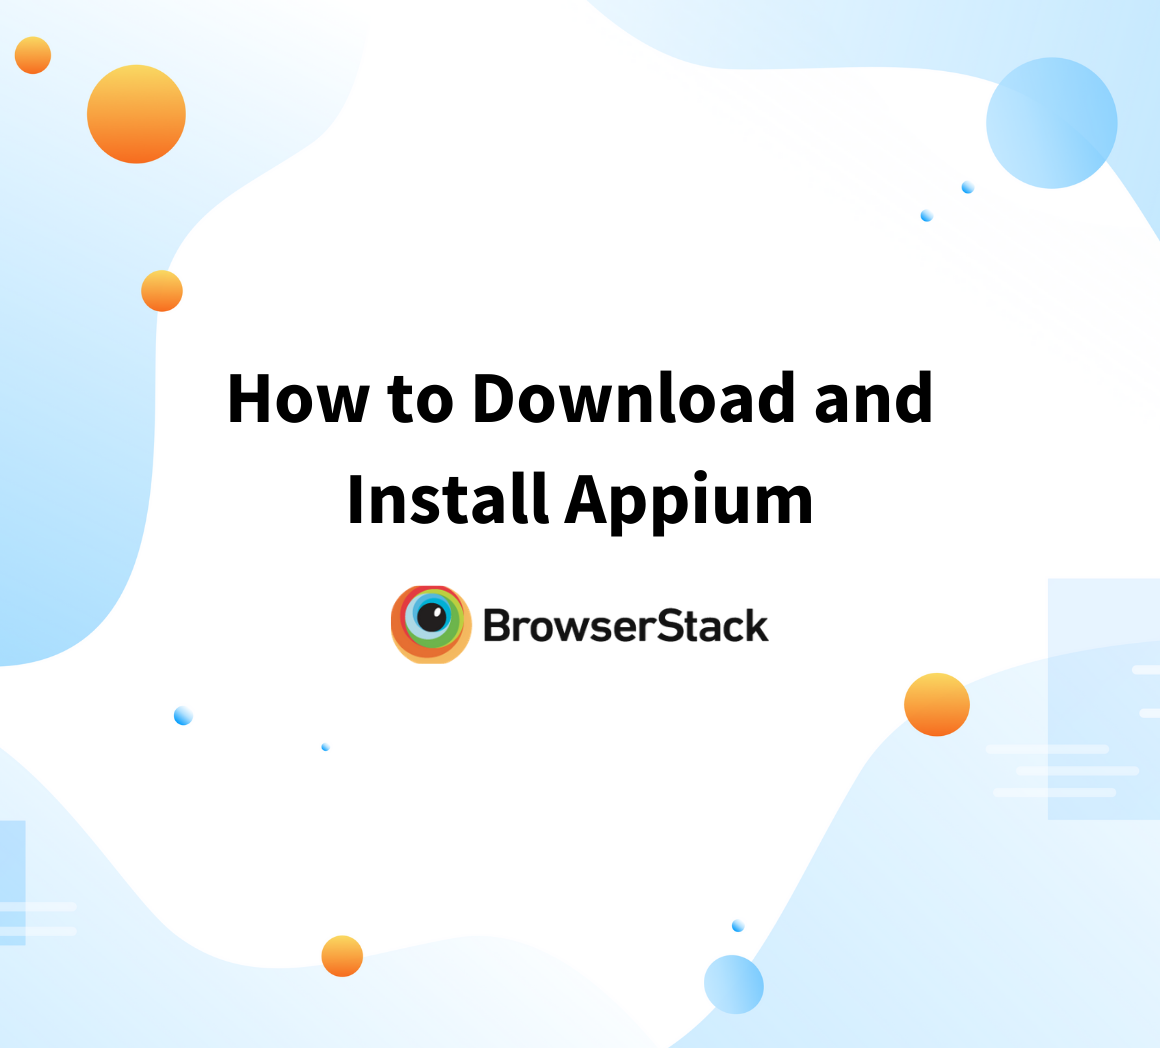 How to Download and Install Appium